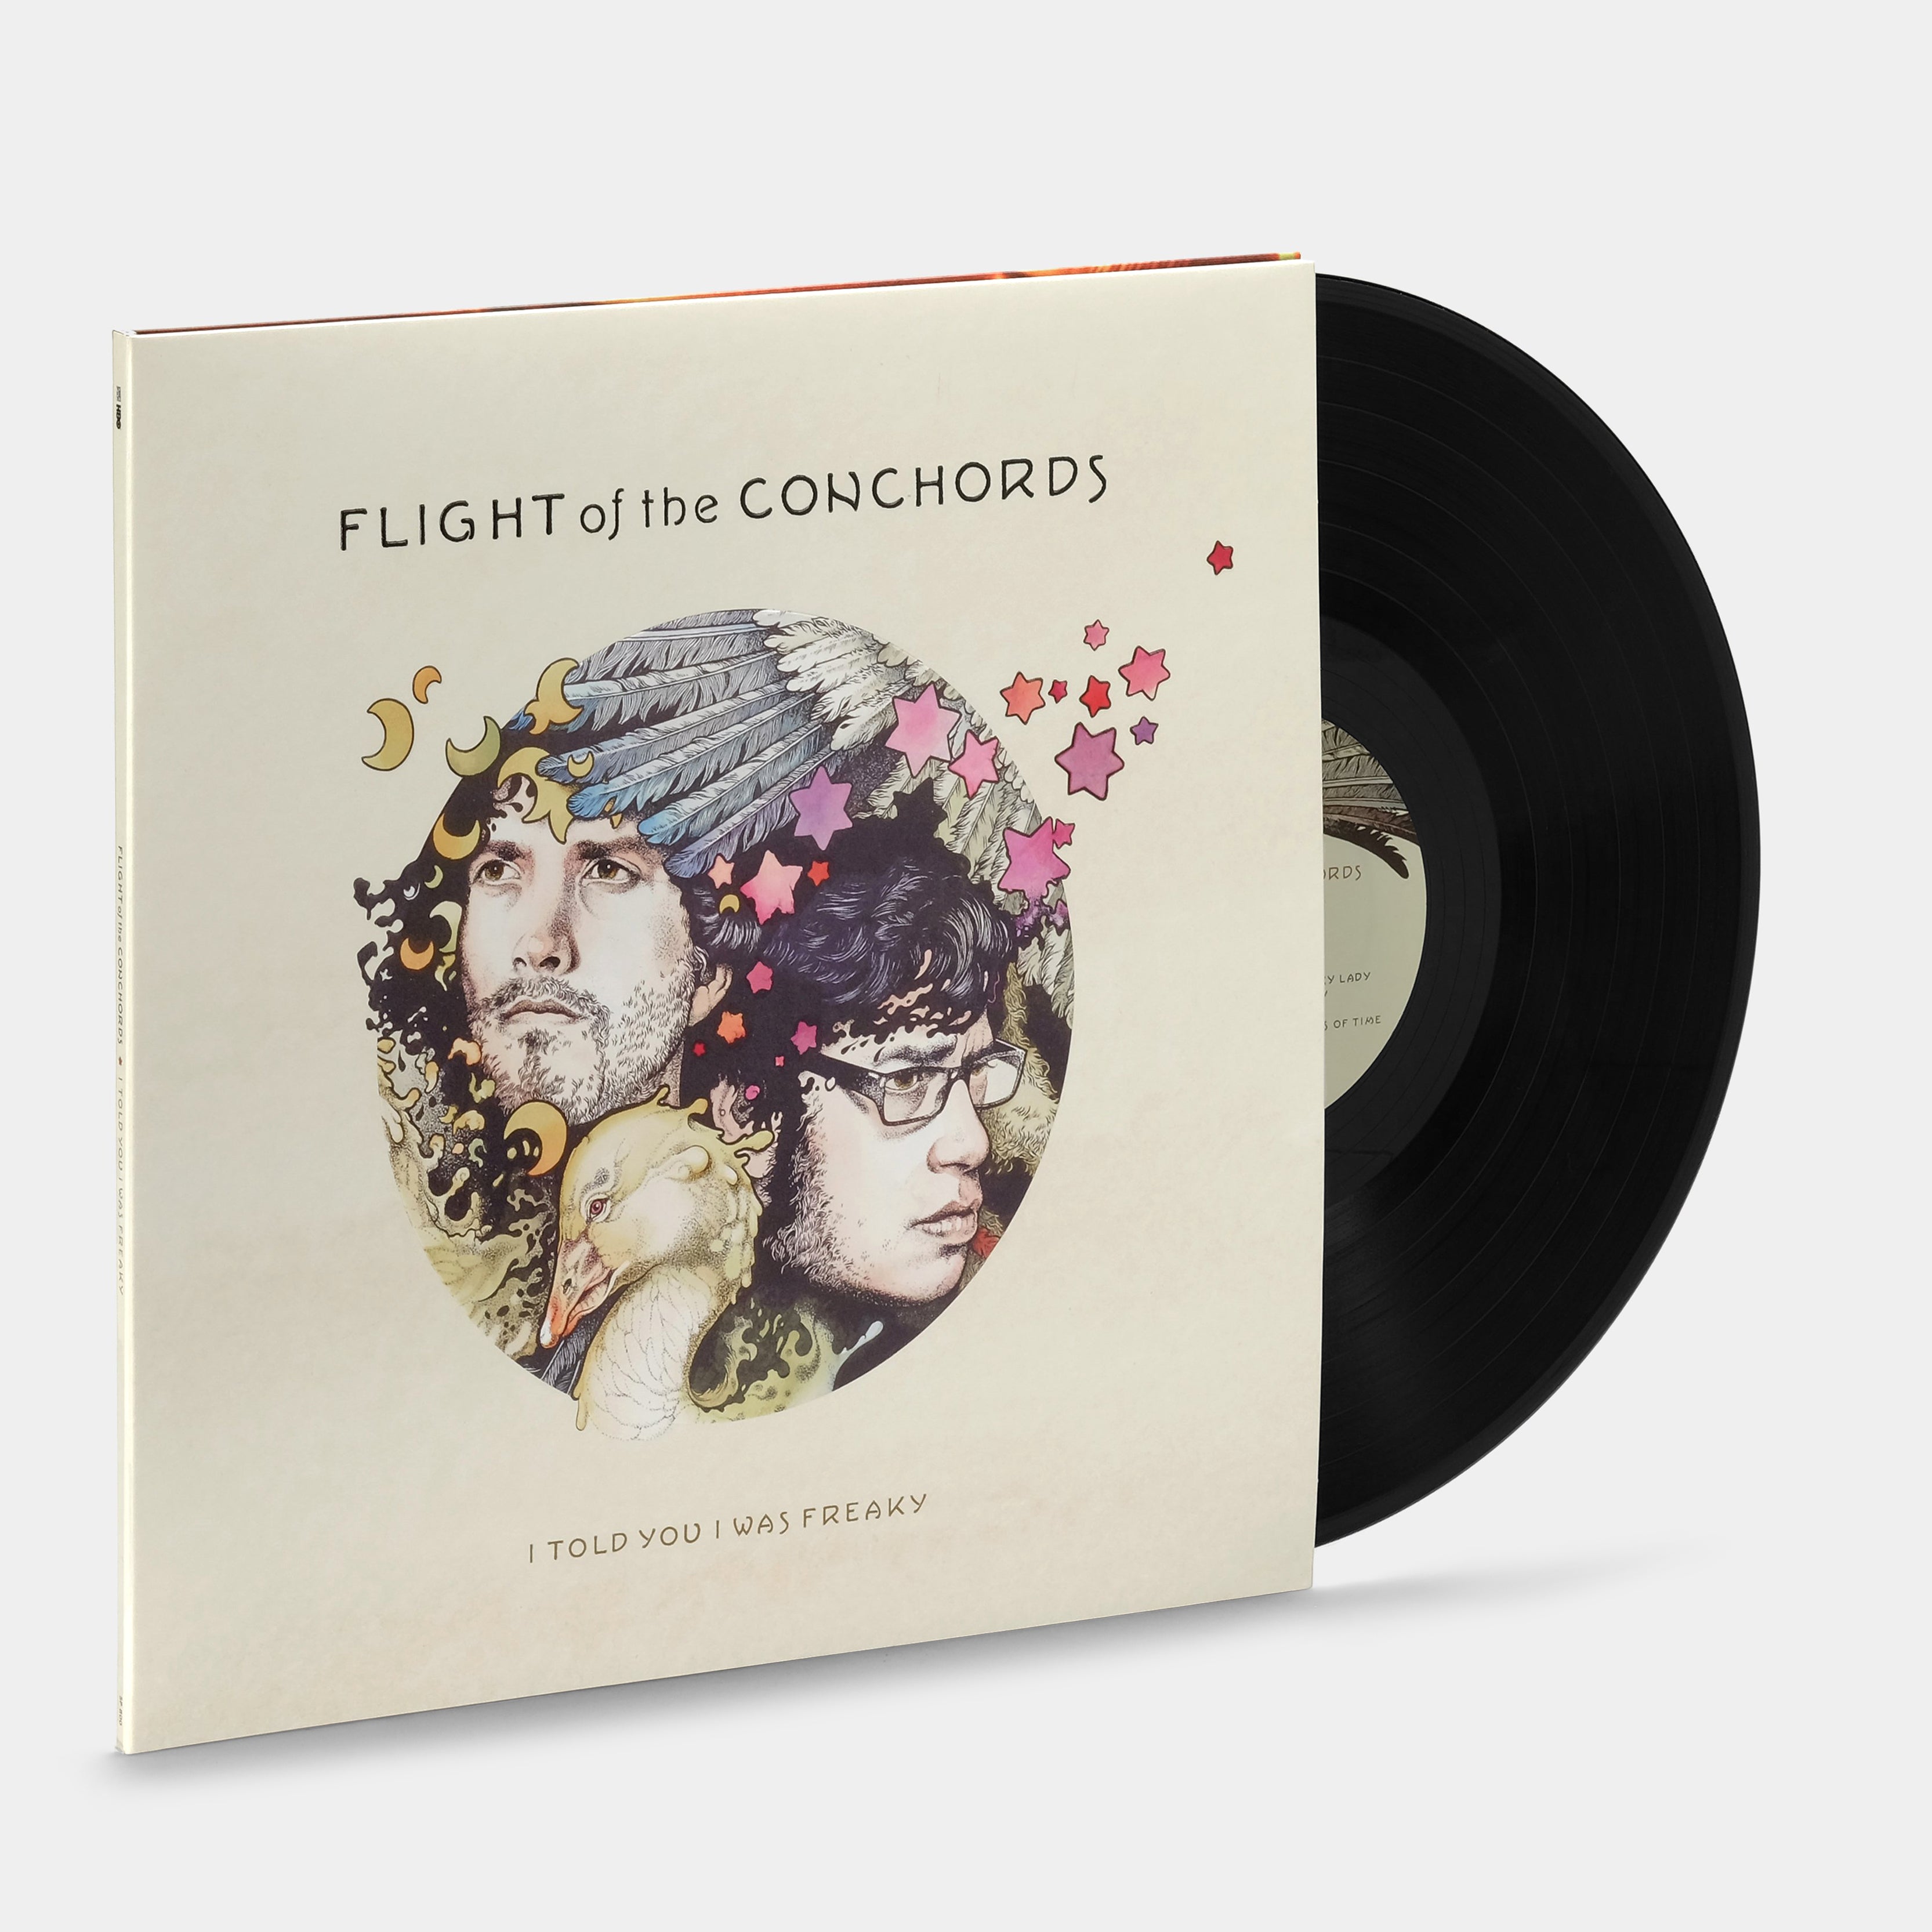 Flight of the Conchords - I Told You I Was Freaky LP Vinyl Record